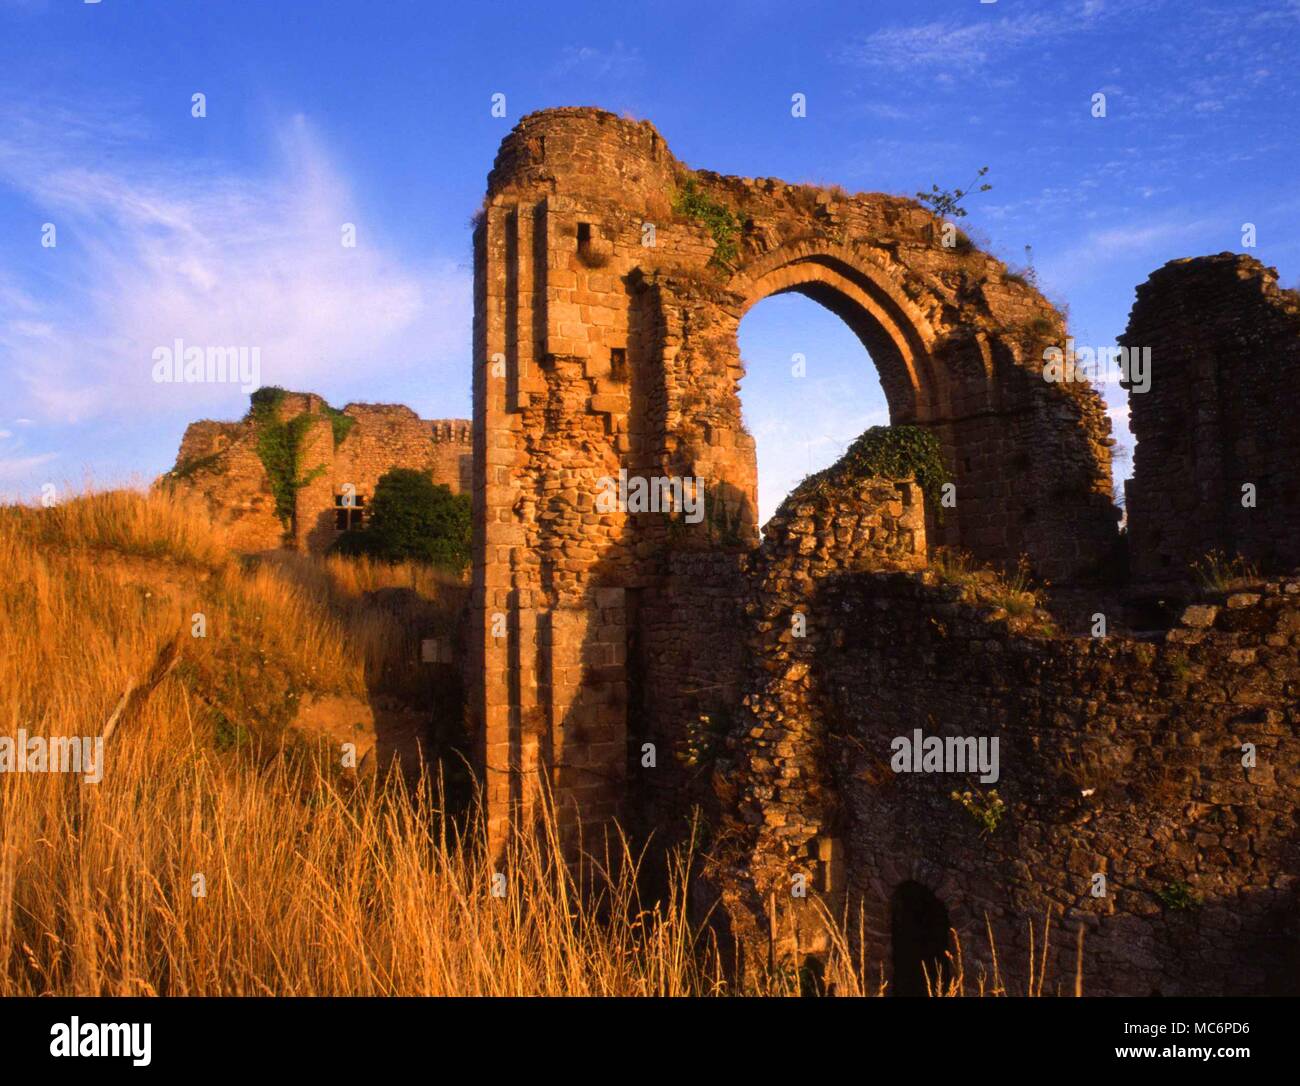 The ruins at Tiffauges, the most important of the casltes belong to Gilles de Rais [1404-1440], where he was supposed to have practised black magic, and to have killed numerous children in his pursuit of witchraft rites. Stock Photo